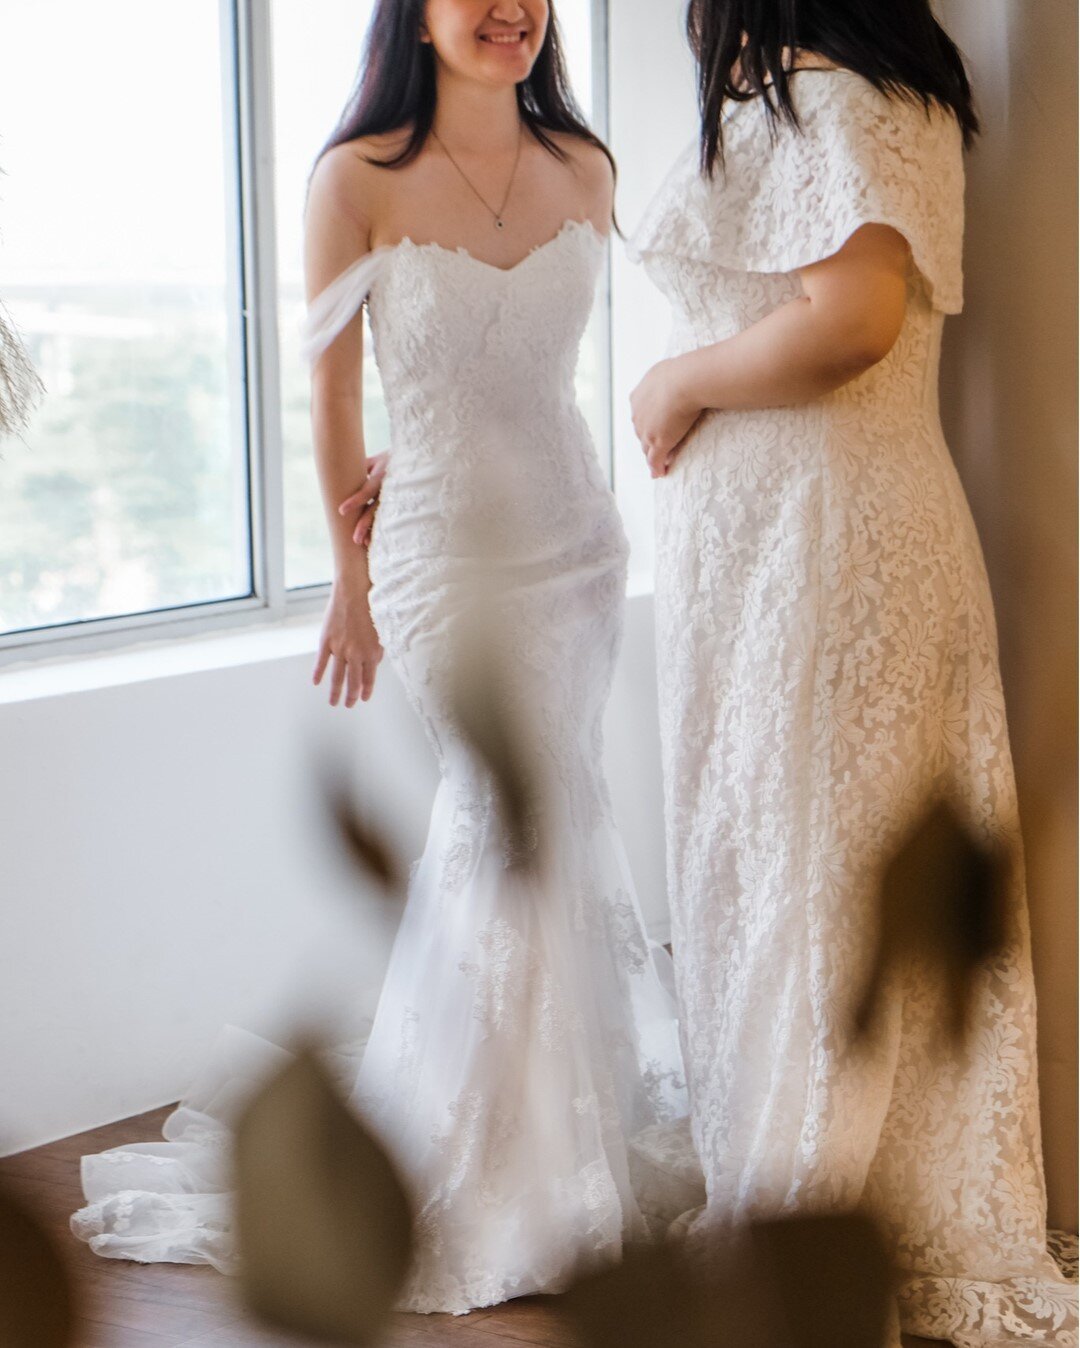 Style not size! Here at Blooming Bride, we embrace all sizes! Try a gown off the rack, and get it altered to fit you perfectly for your big day 😉⠀⠀⠀⠀⠀⠀⠀⠀⠀
.⠀⠀⠀⠀⠀⠀⠀⠀⠀
.⠀⠀⠀⠀⠀⠀⠀⠀⠀
.⠀⠀⠀⠀⠀⠀⠀⠀⠀
 #bodypositive #plussize #bodypositivity #selflove #fitness #